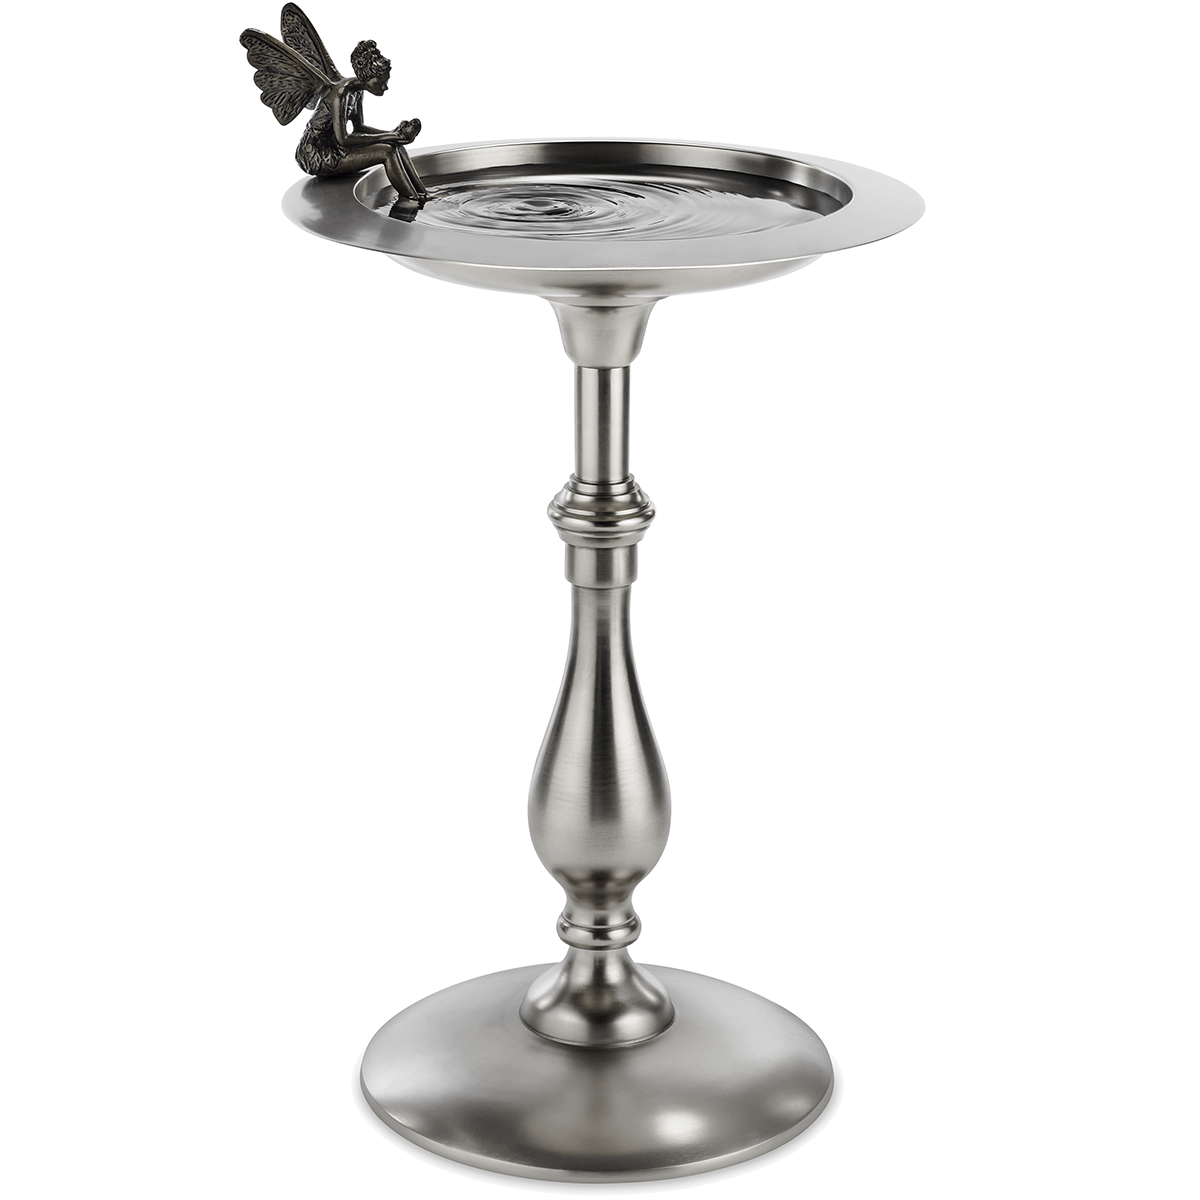 Classic Pewter Bird Bath Pedestal with Fairy - Good Directions